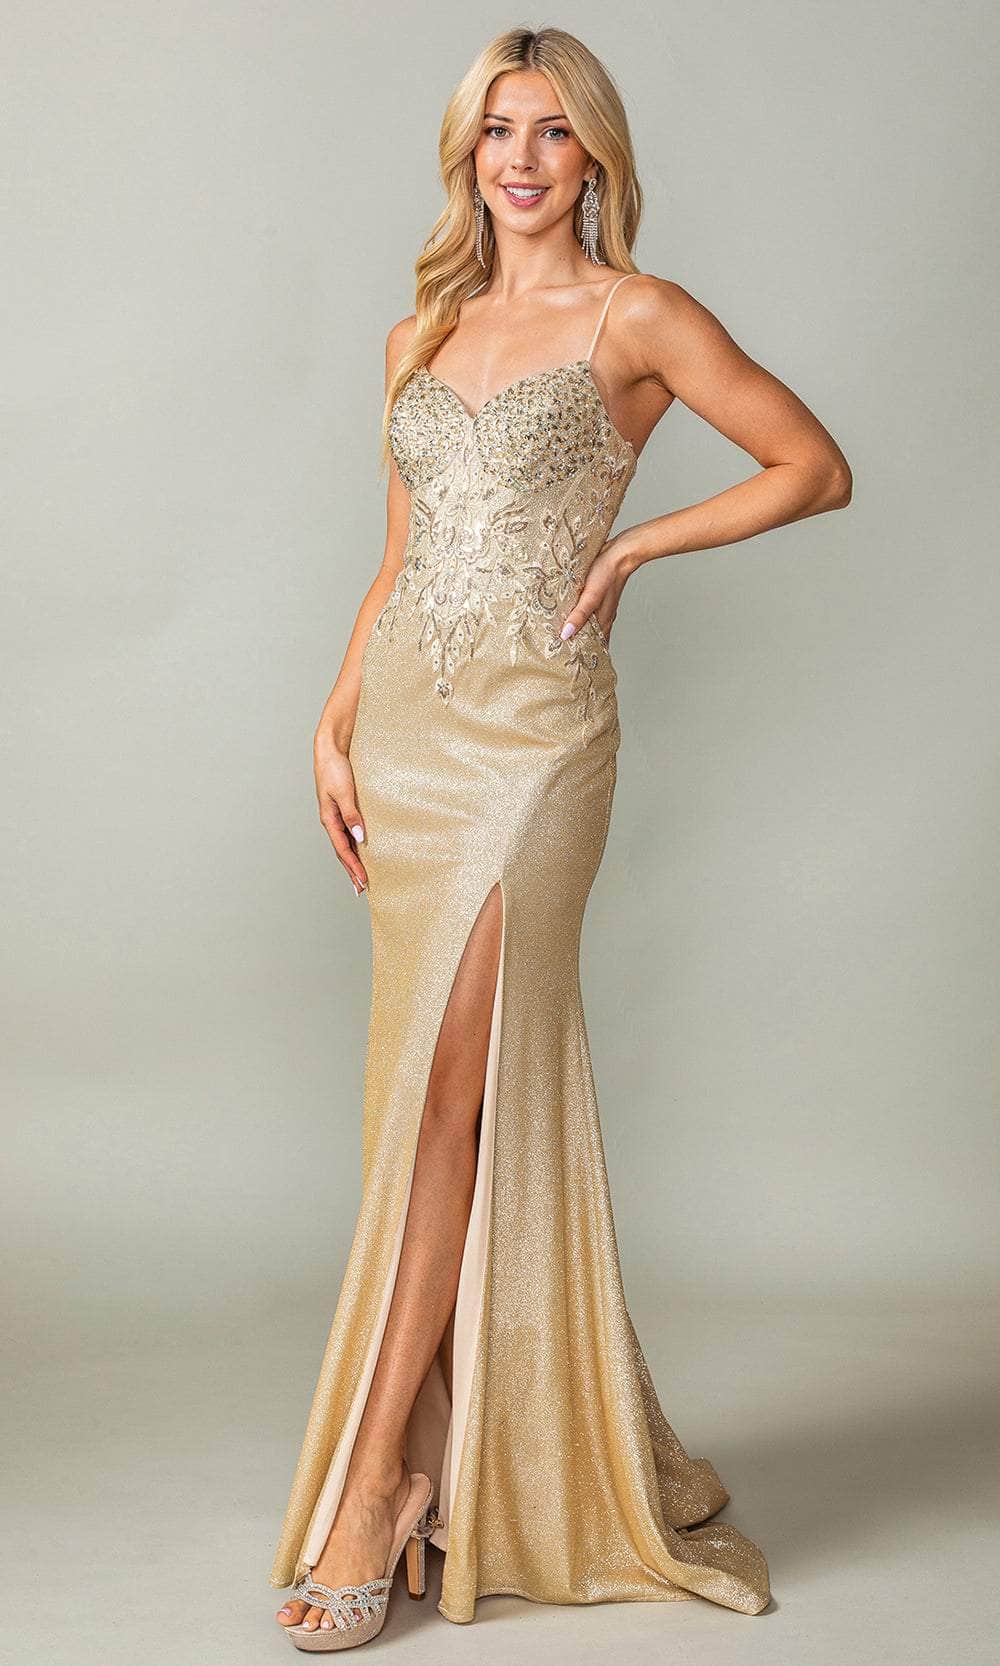 Image of Dancing Queen 4375 - Embroidered High Slit Prom Dress